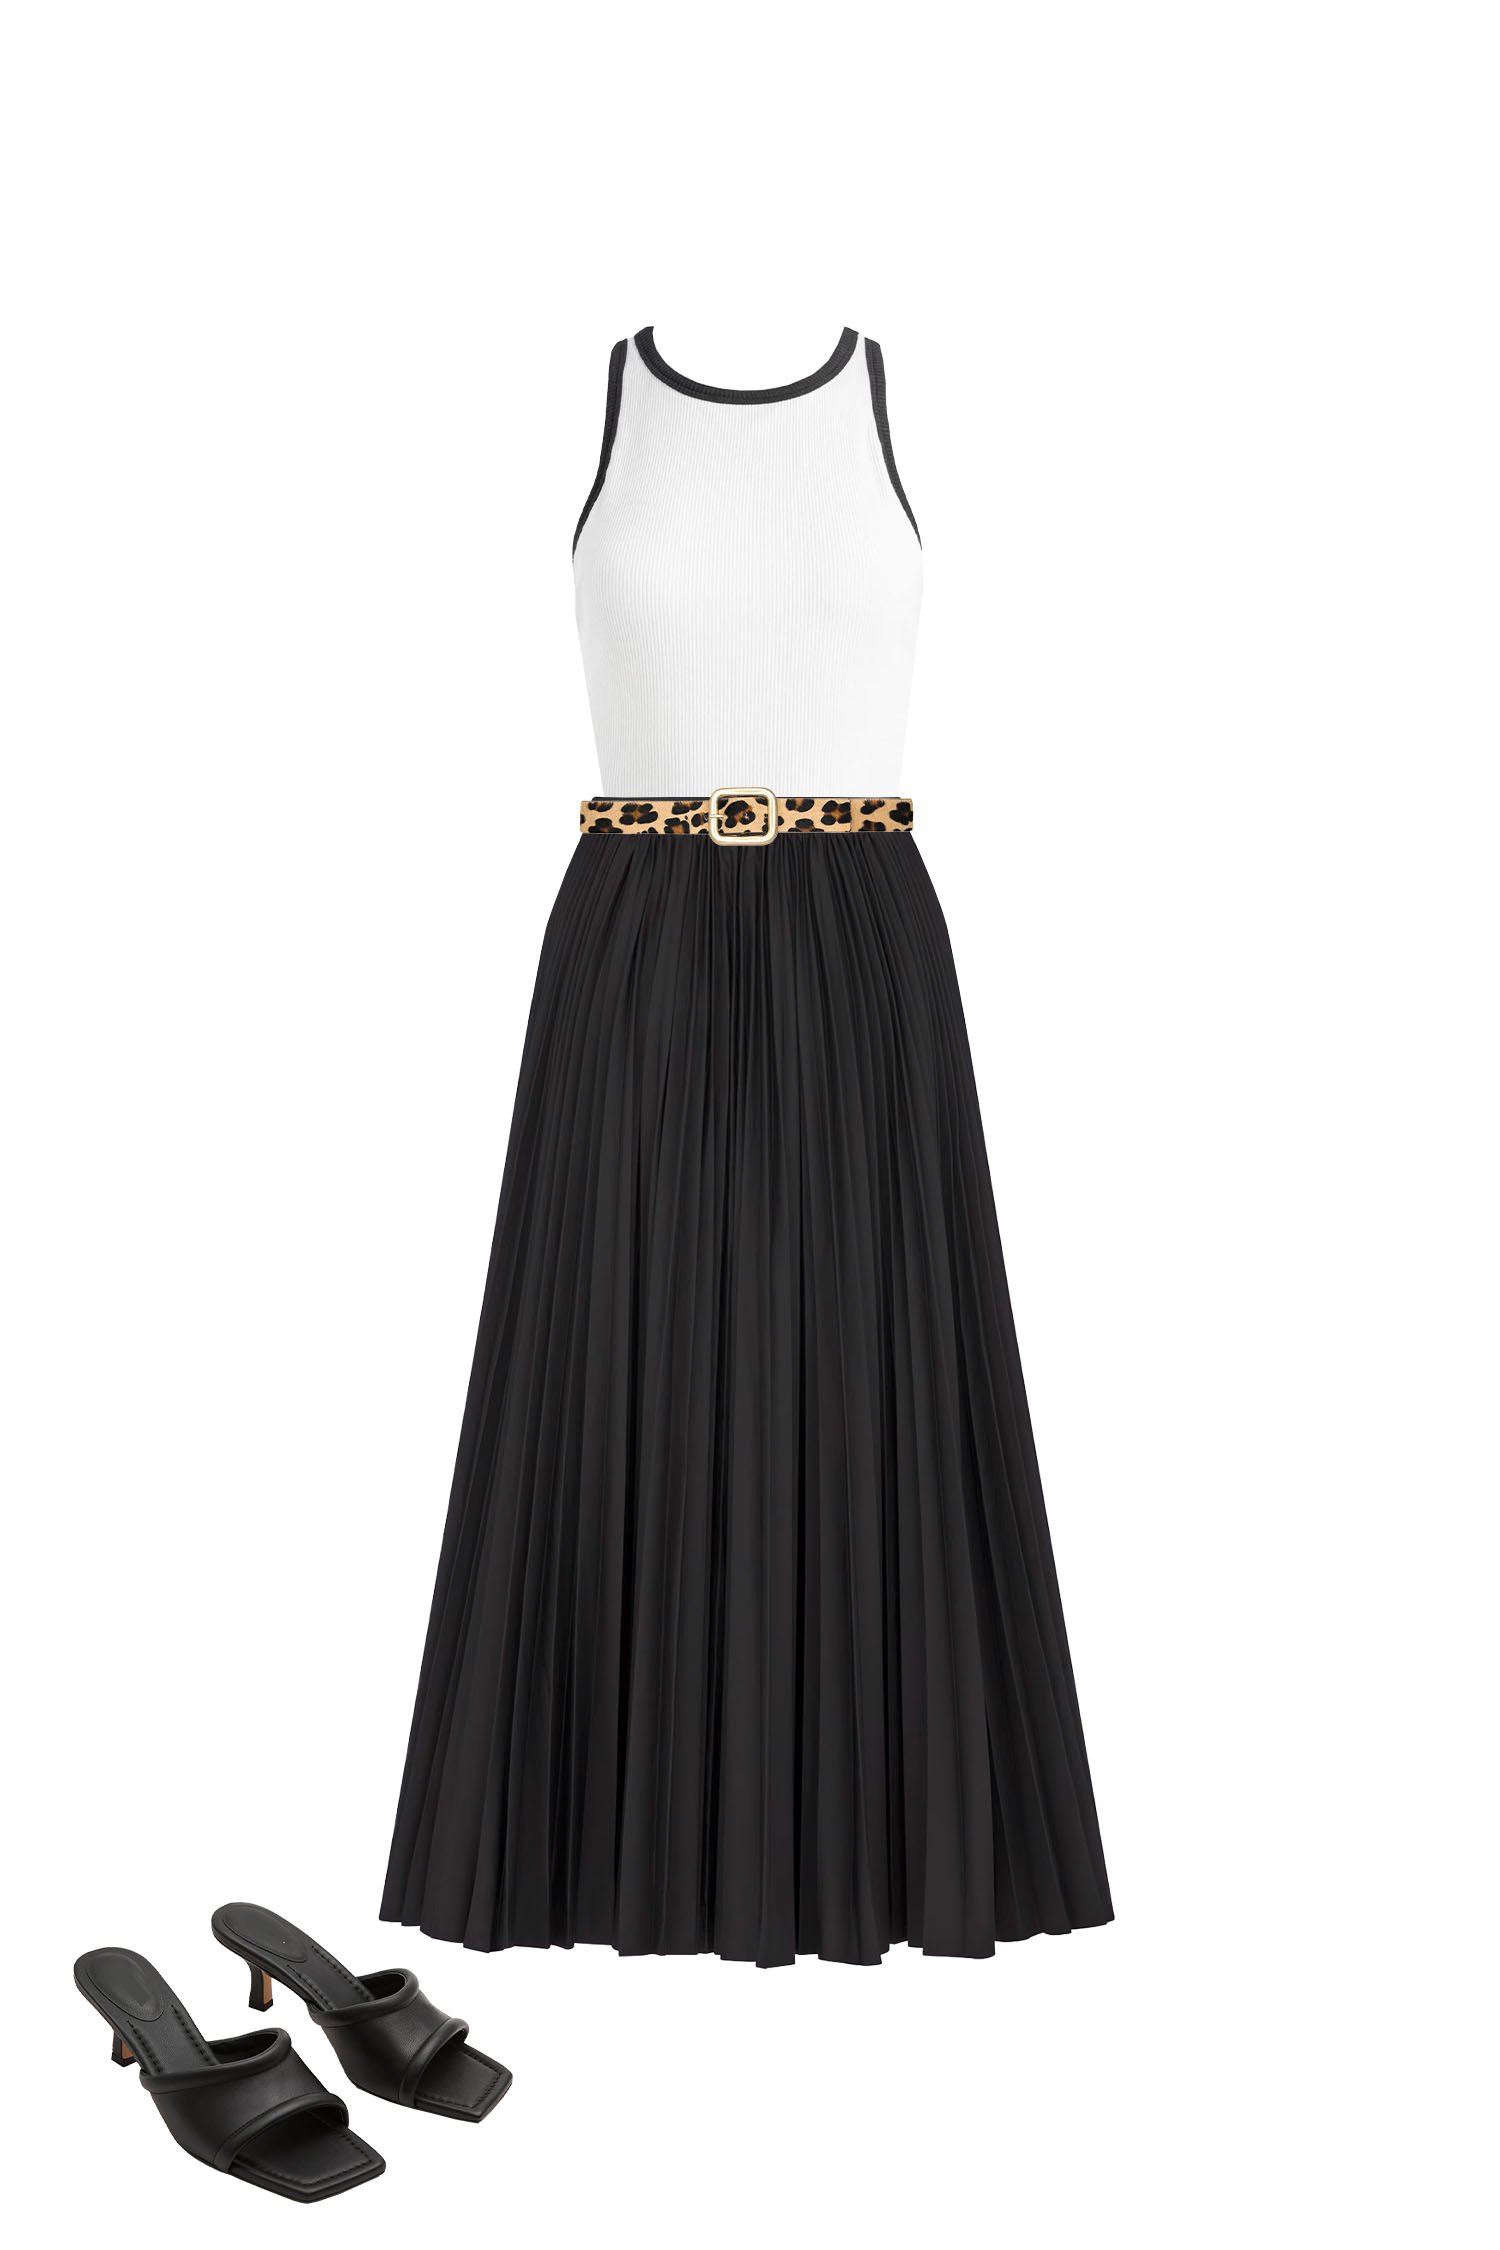 Black Pleated Skirt Outfit with Leopard Print Belt, White Tank Top with Black Trim, and Black Square Toe Heeled Sandals